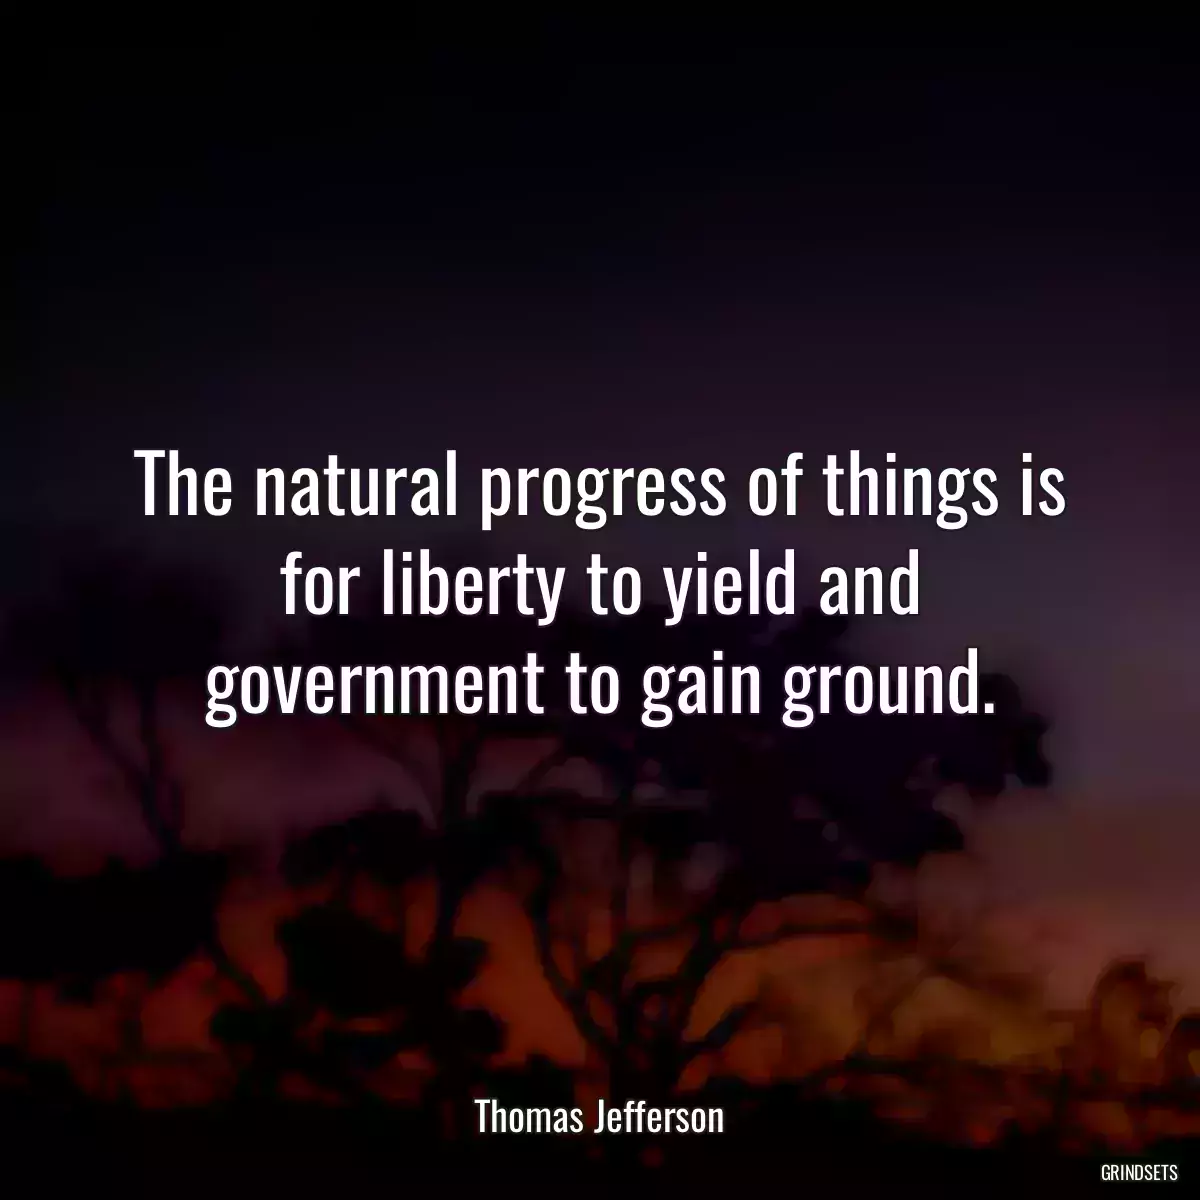 The natural progress of things is for liberty to yield and government to gain ground.